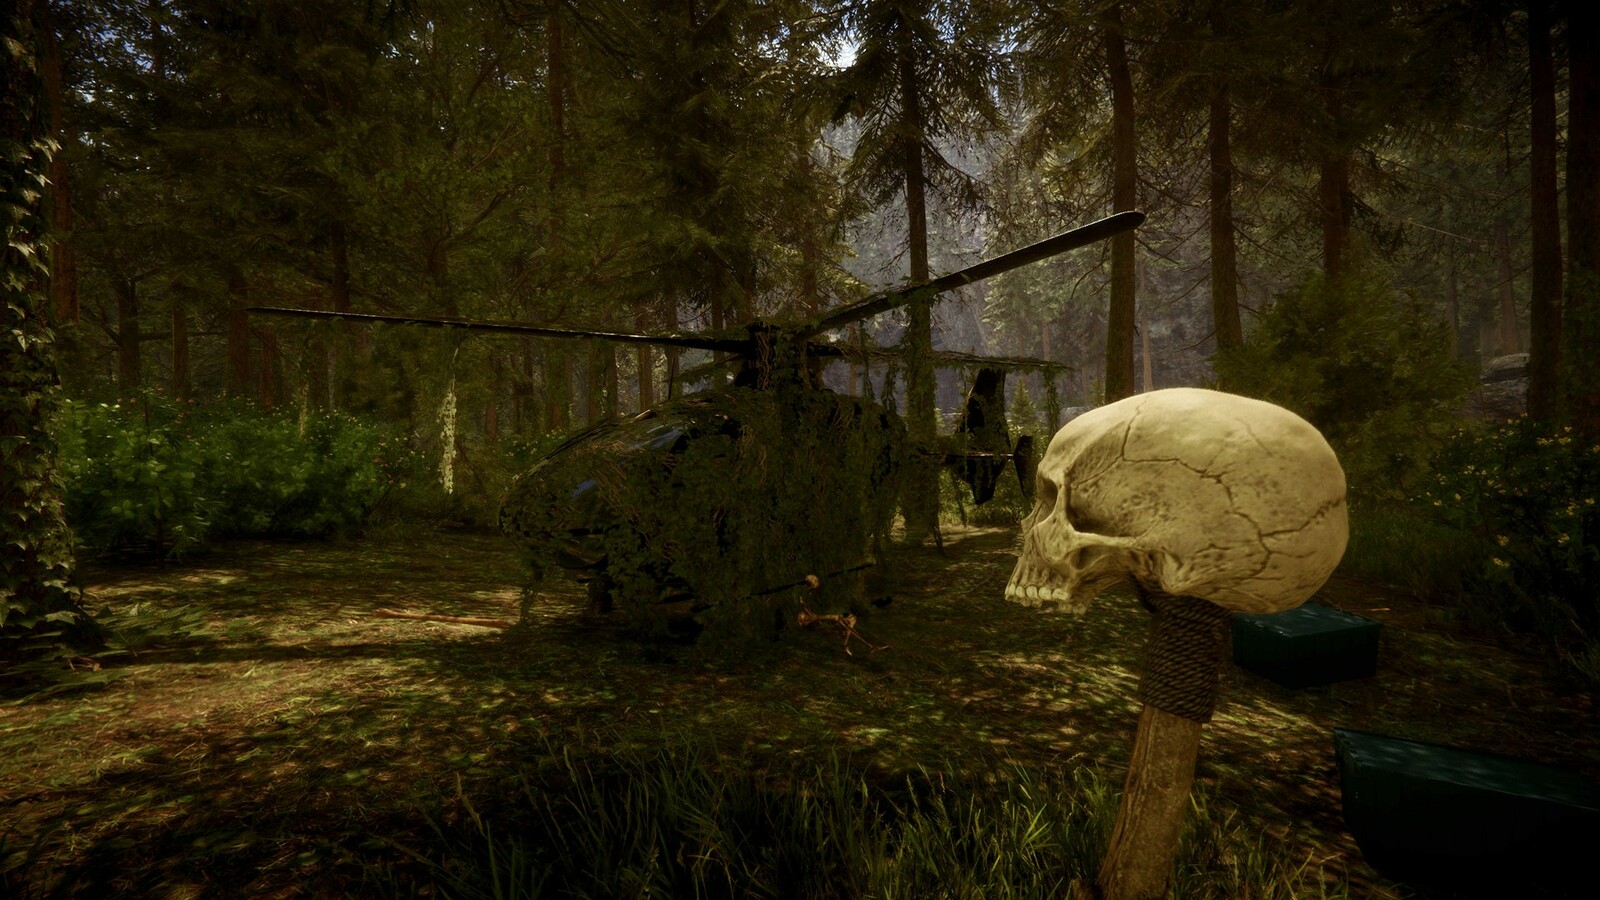 Sons Of The Forest map: Every important location